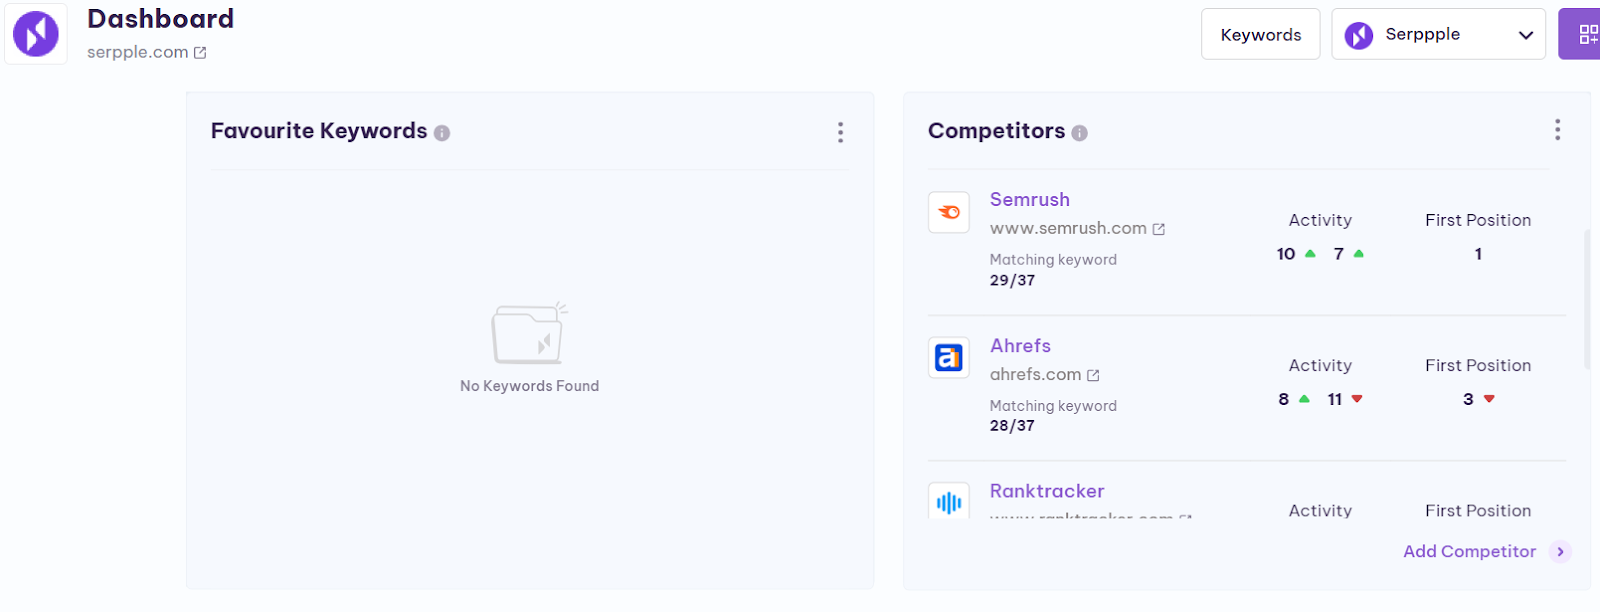 favorite and competitors keywords on dashboard